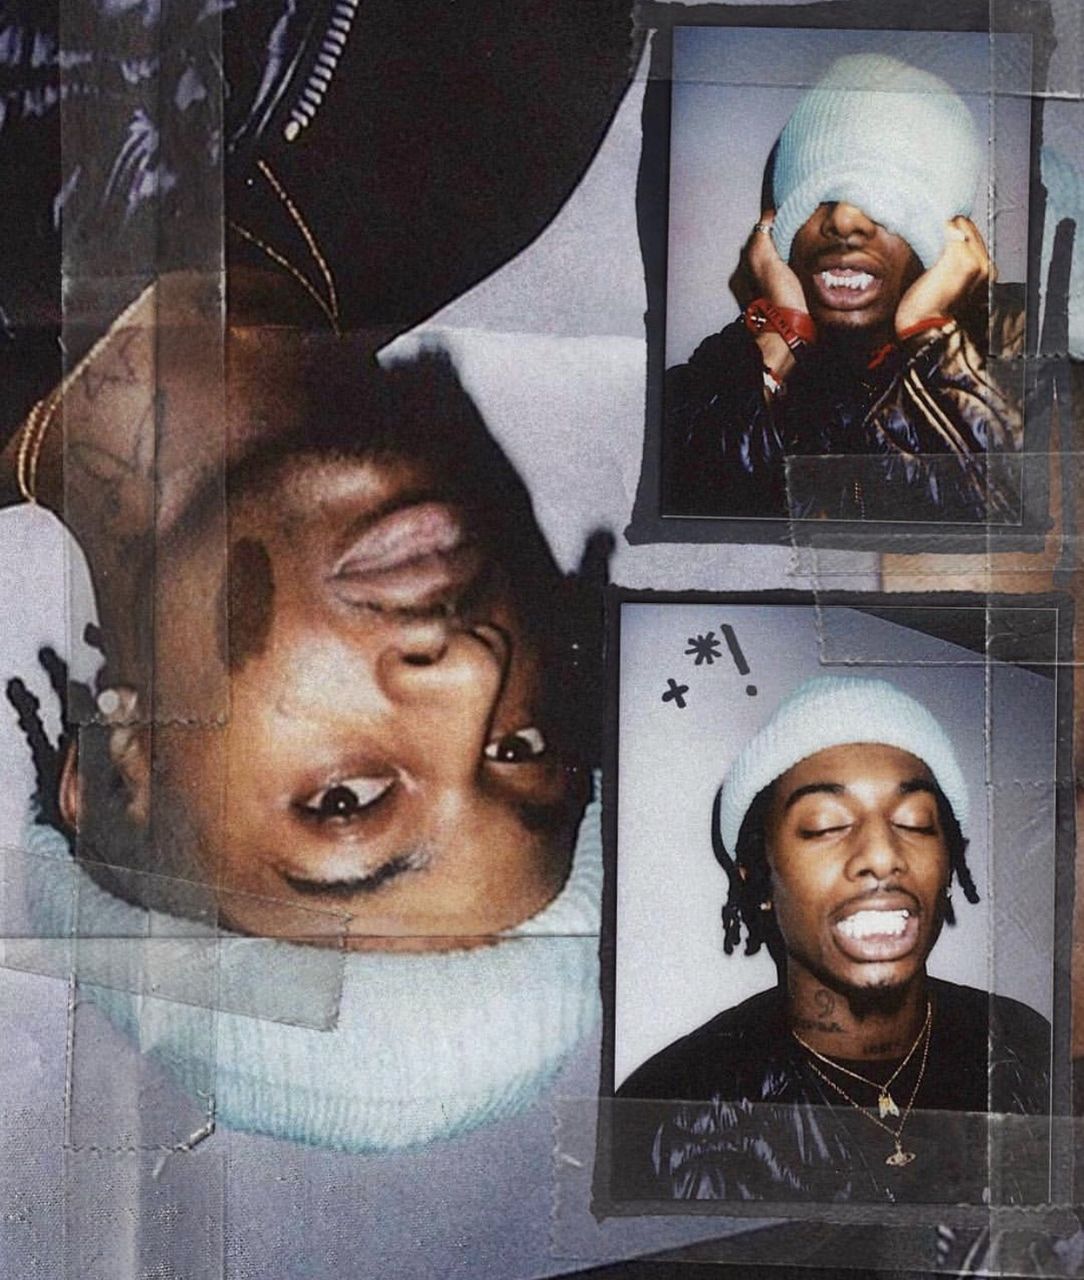 image about playboi carti. See more about